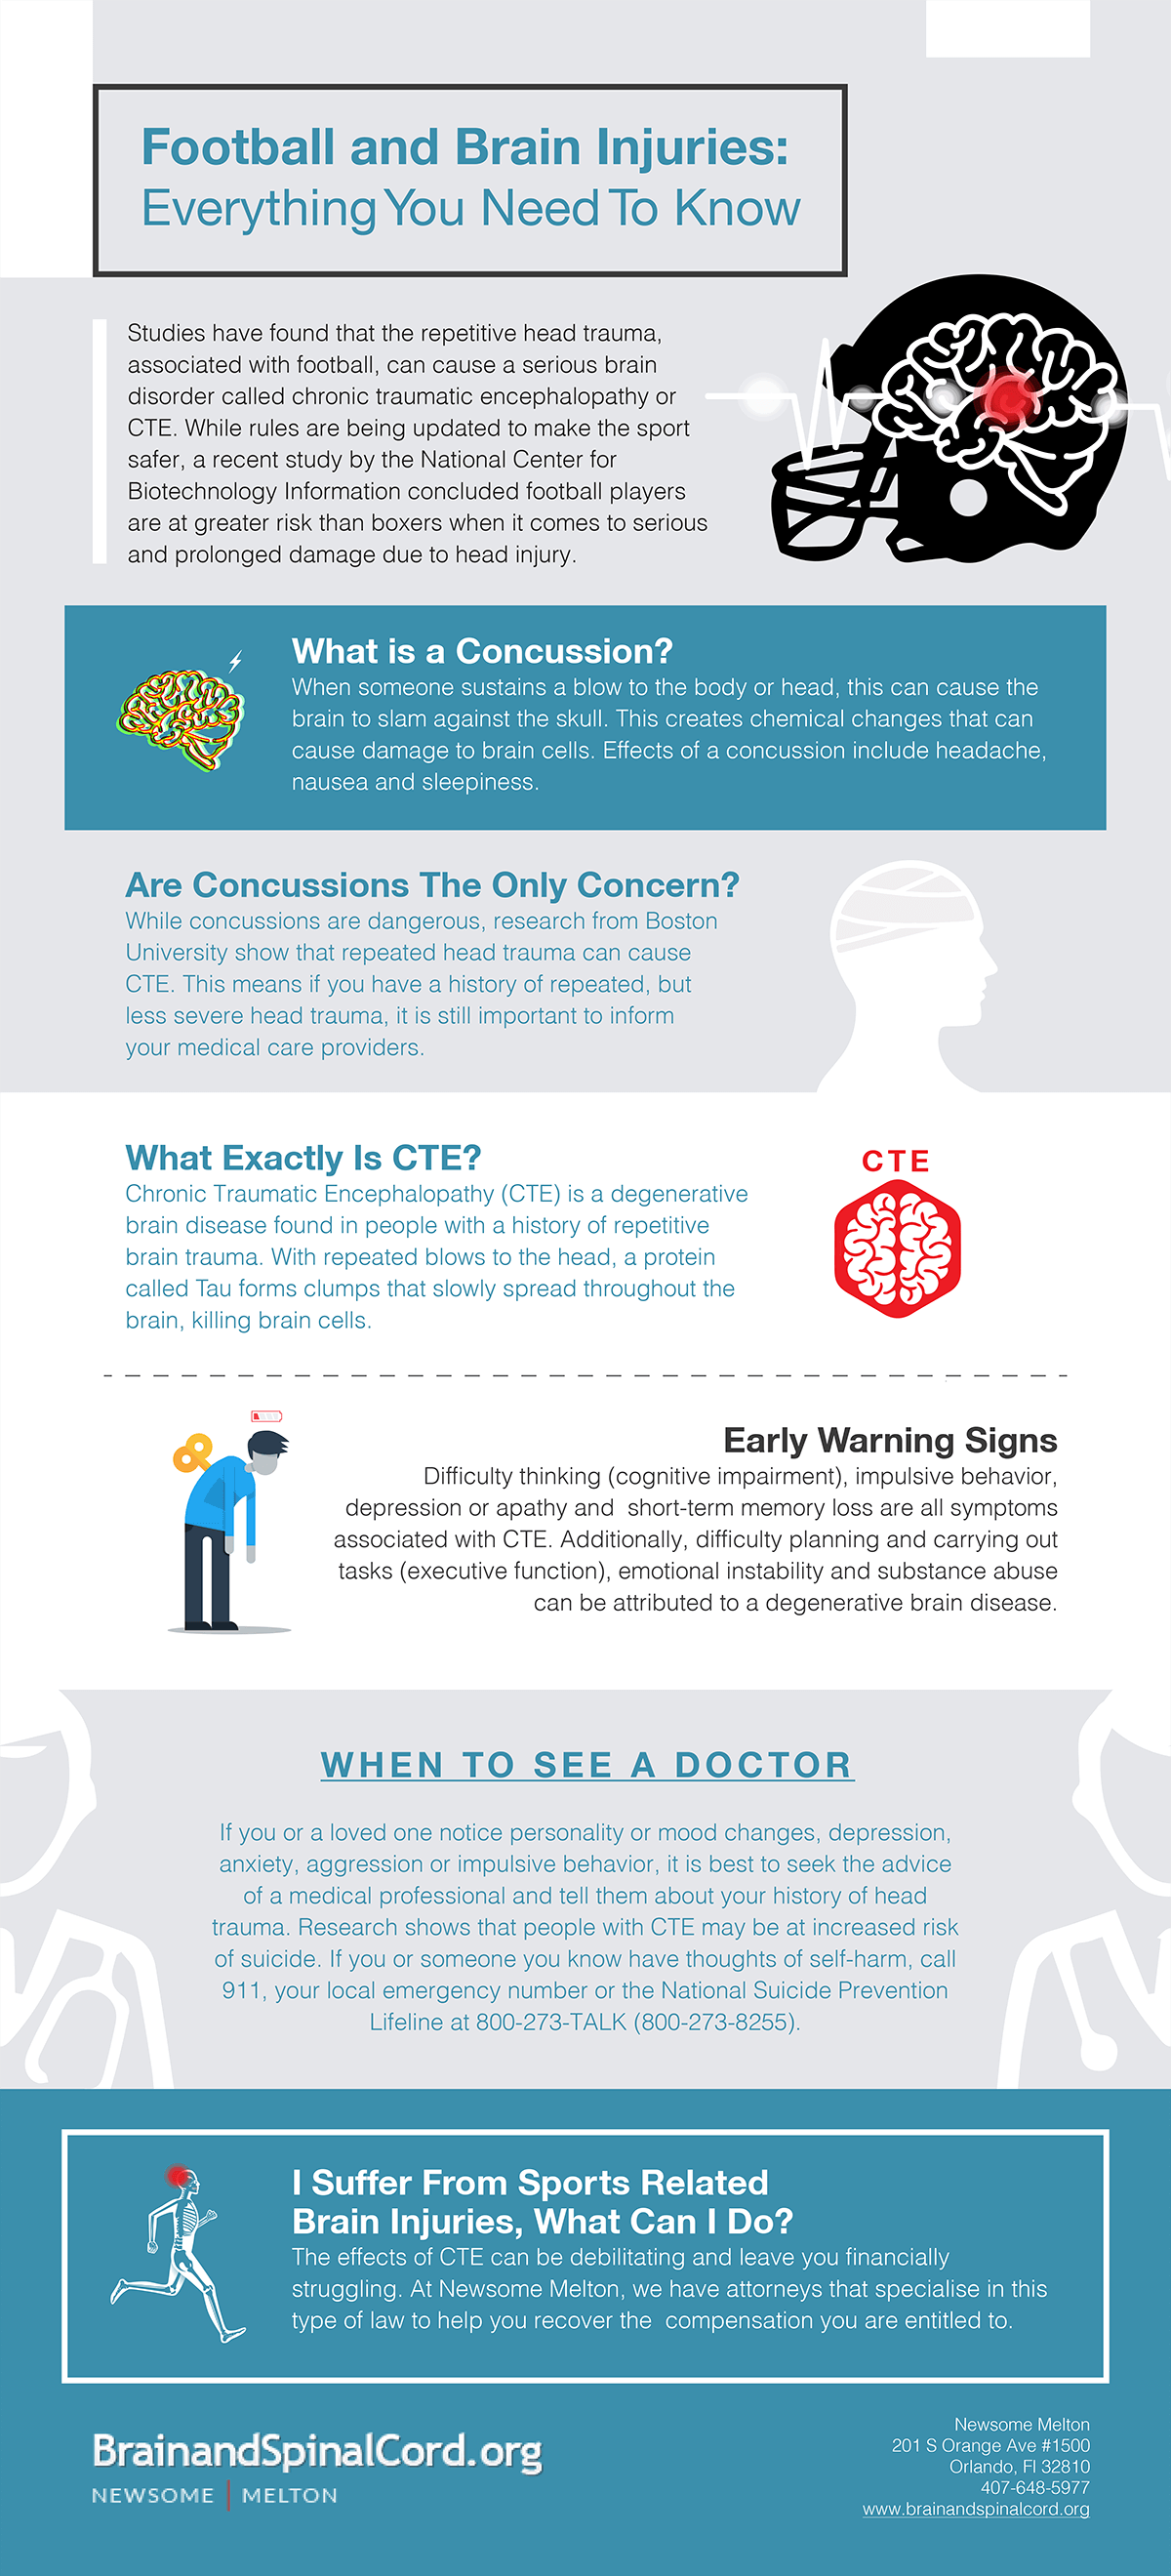 Everything You Need to Know about Football and Brain Injuries - Infographic by BrainAndSpinalCord.Org